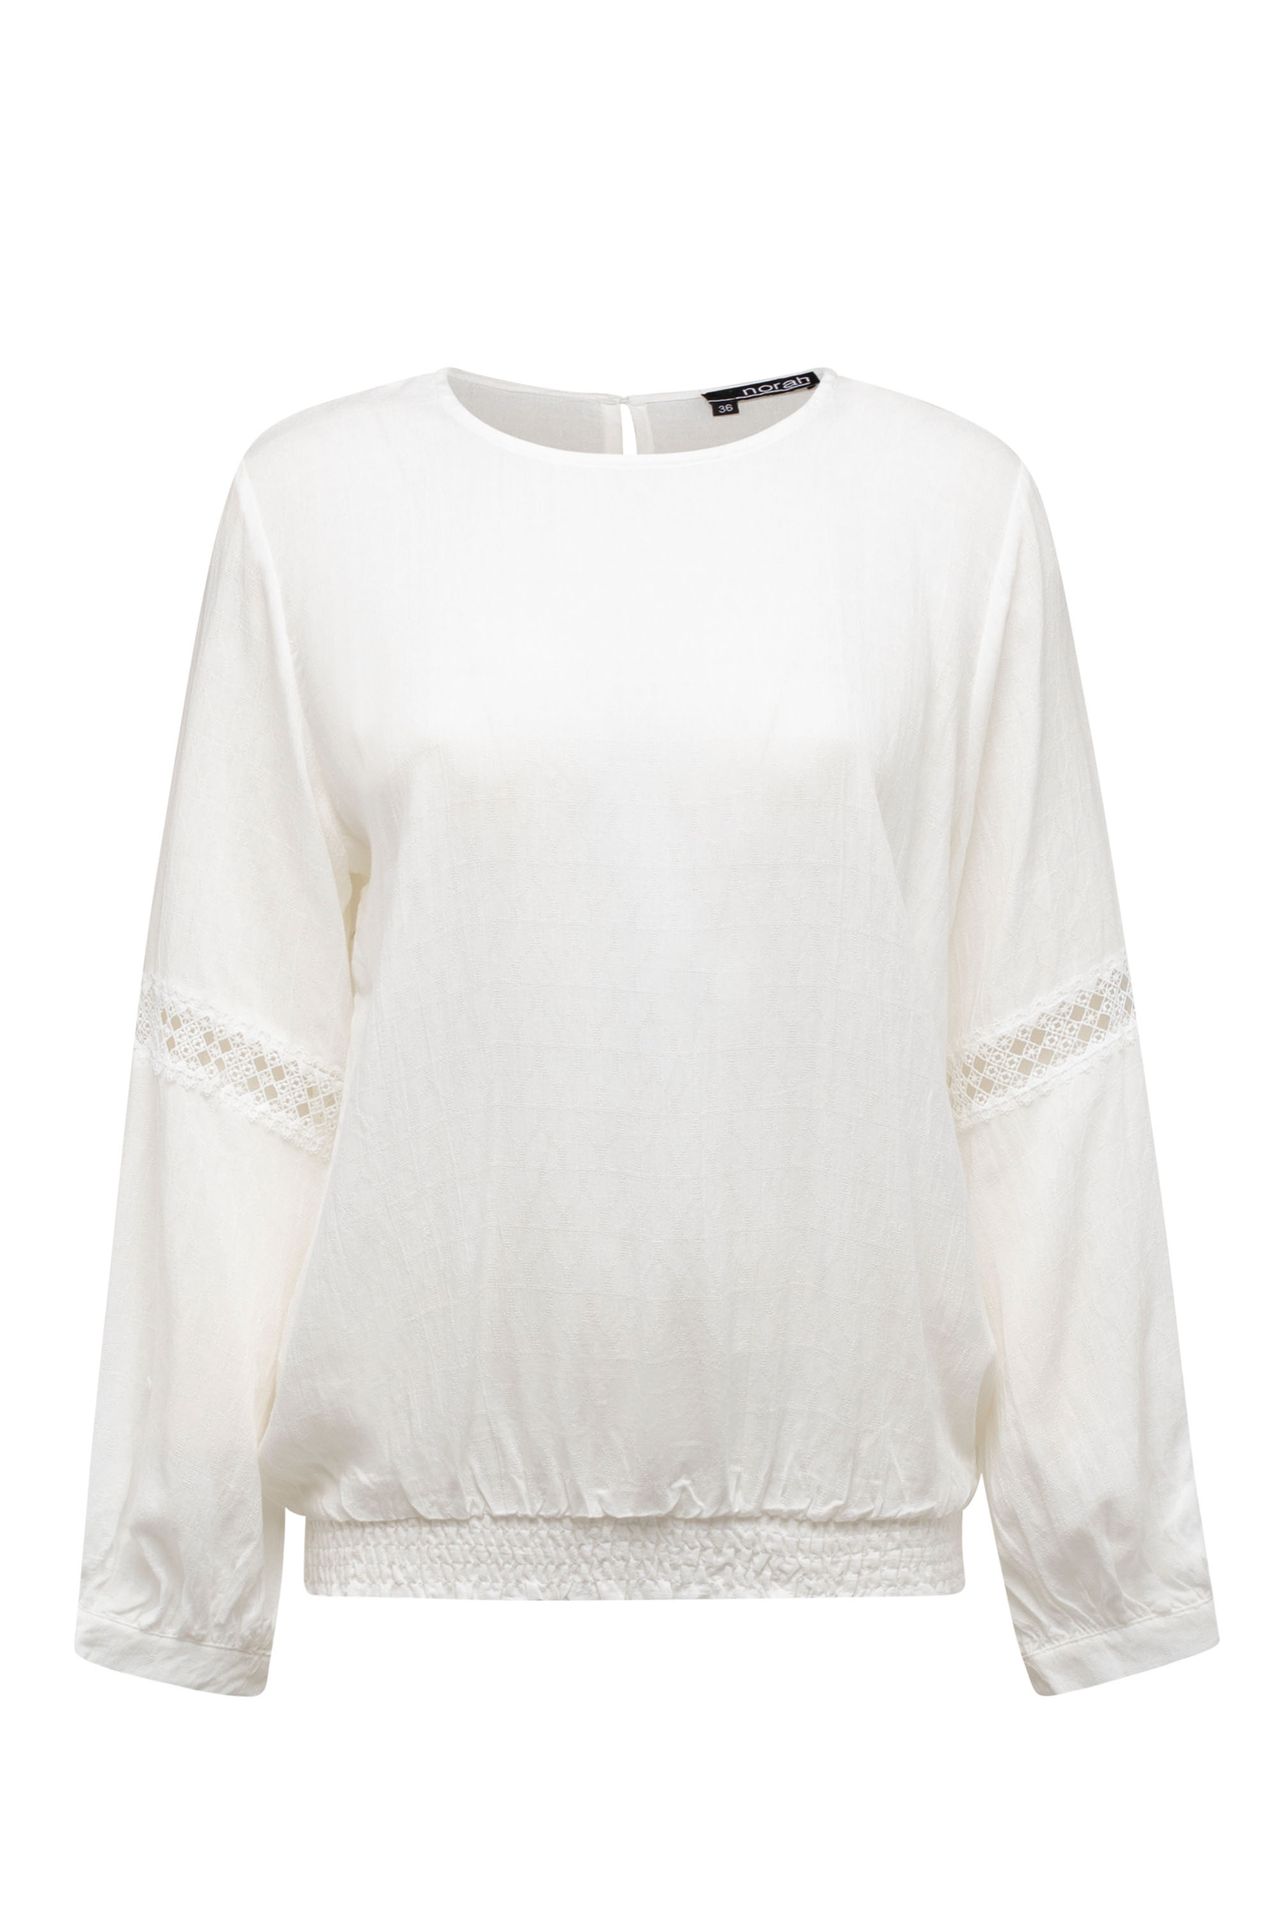  Blouse wit off-white 213342-101-44